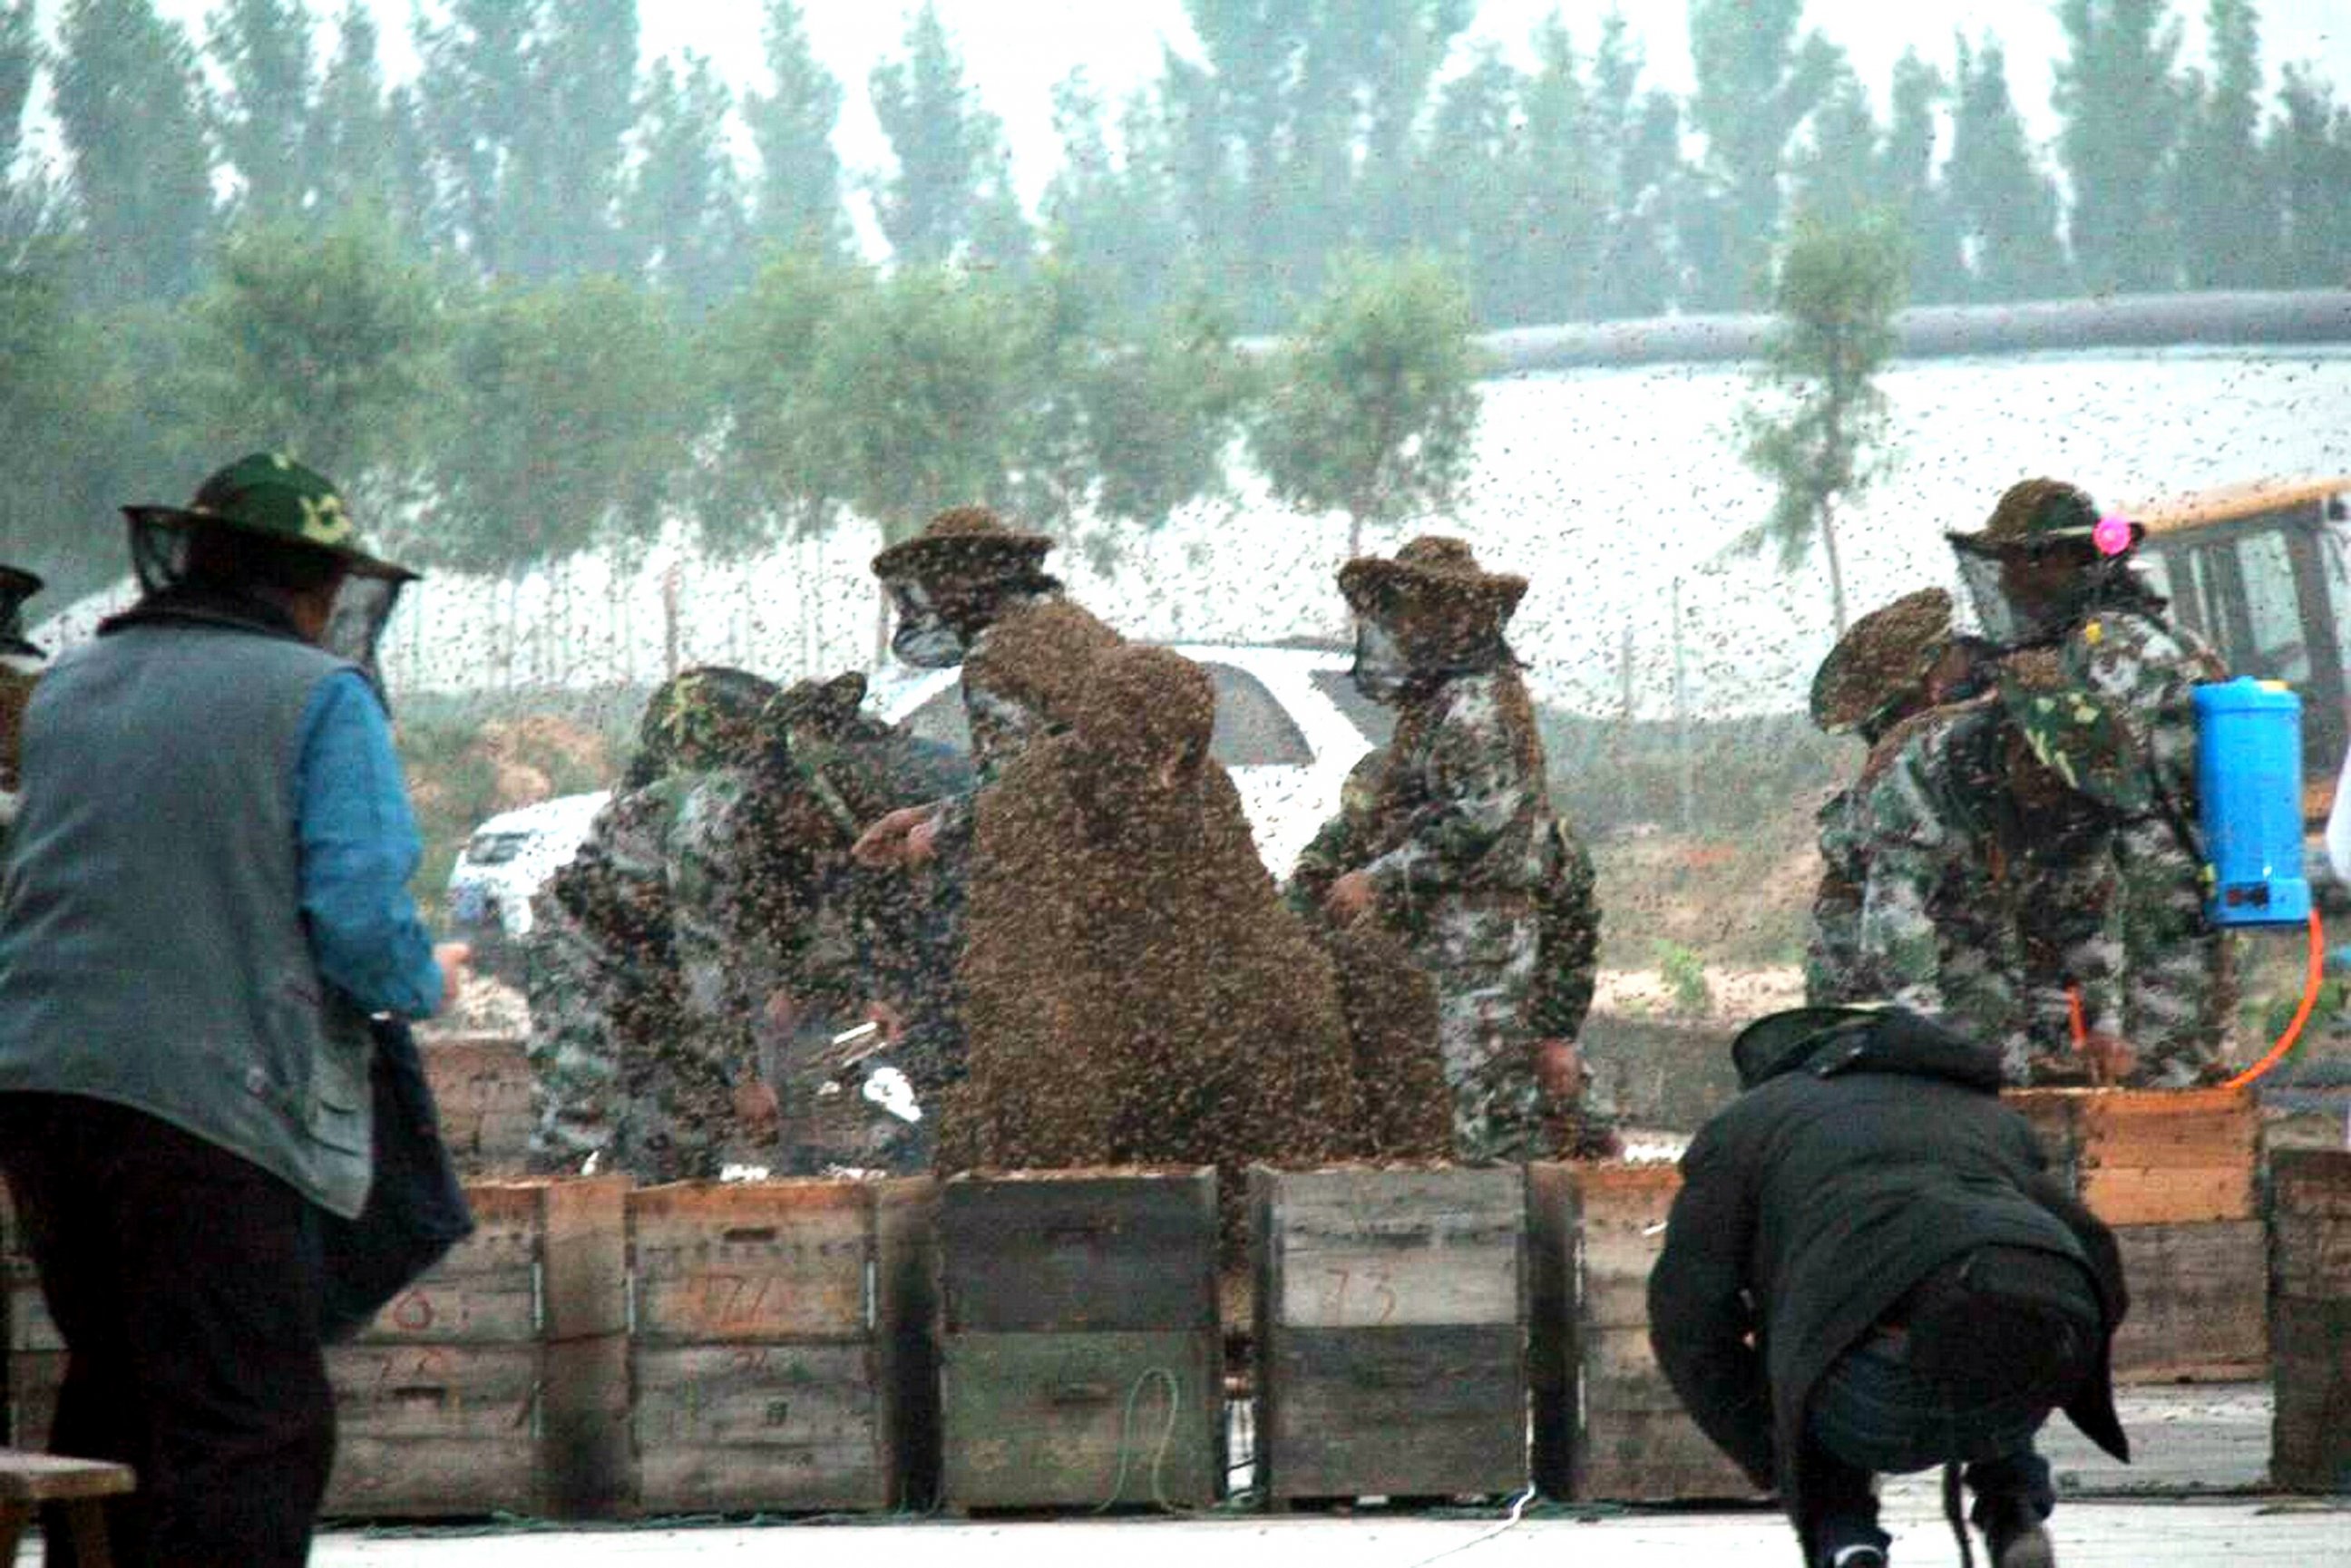 PHOTO: Assistants open boxes to dump bees on the bee-covered body of Chinese beekeeper Gao Bingguo as he challenges to set a new Guinness World Record in Liangzhuang, China, May 25, 2015.